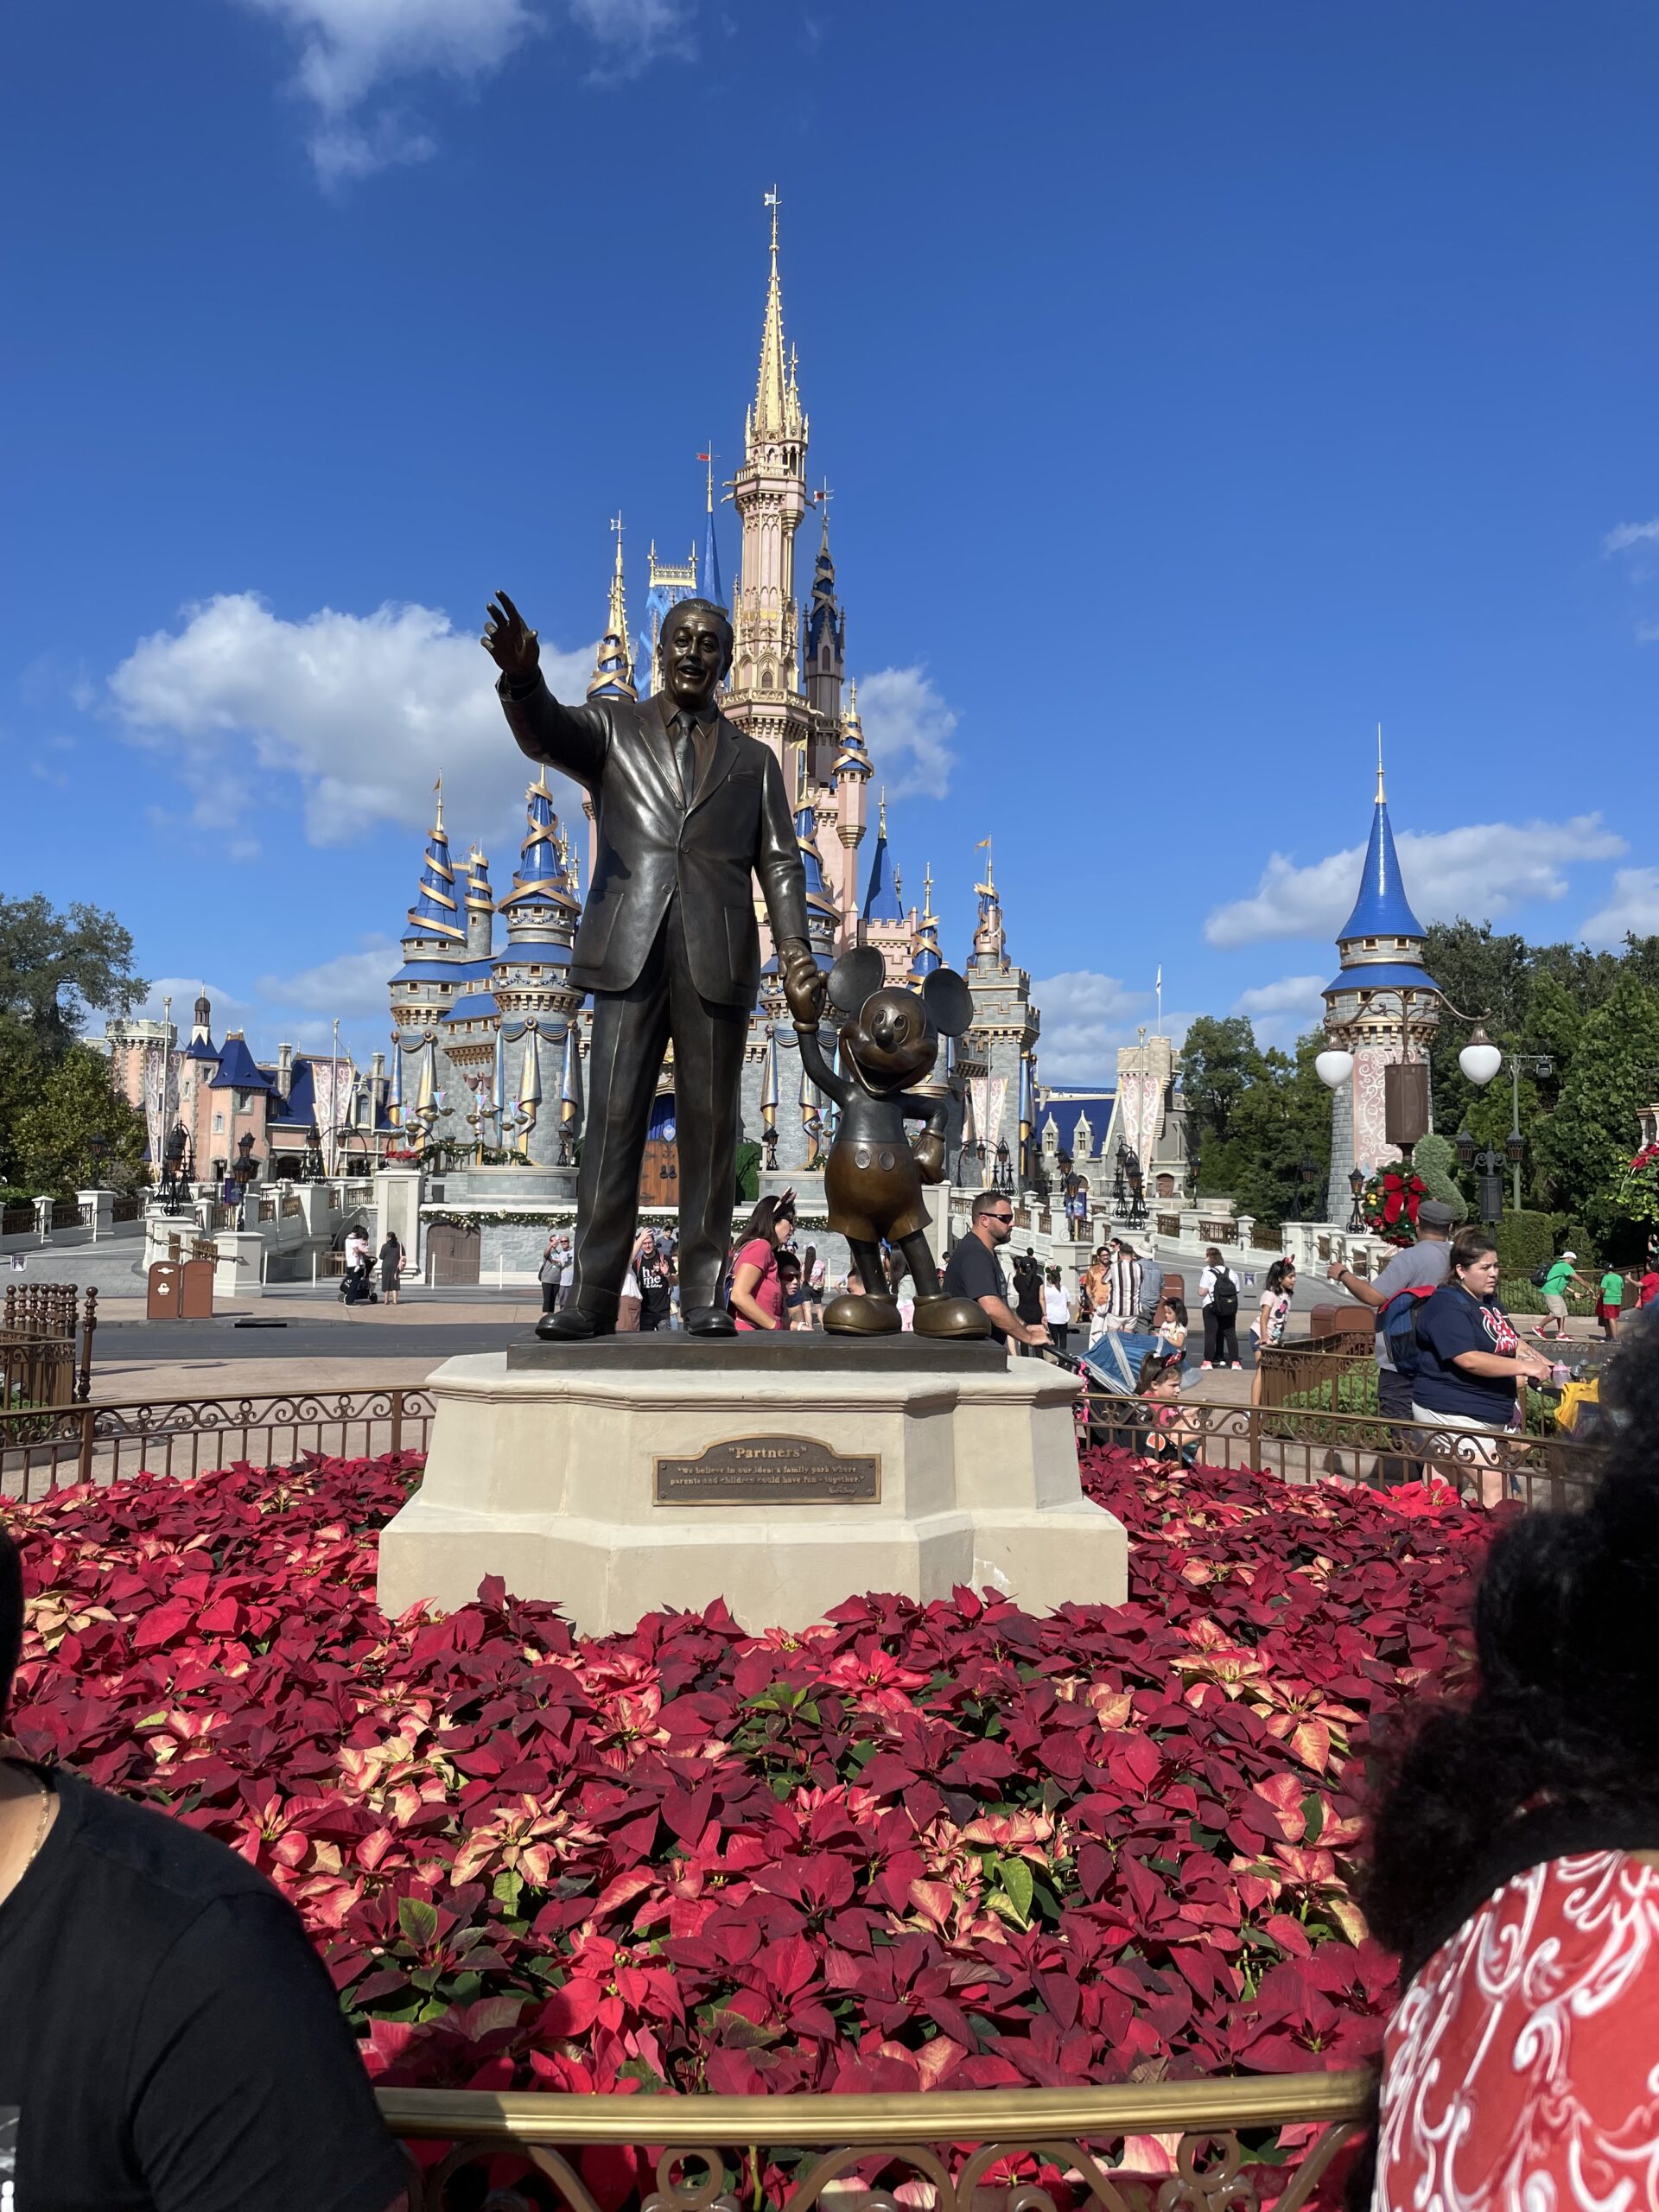 Best Disney Parks To Visit If You Have Just 1 Day Disney World Parks 1